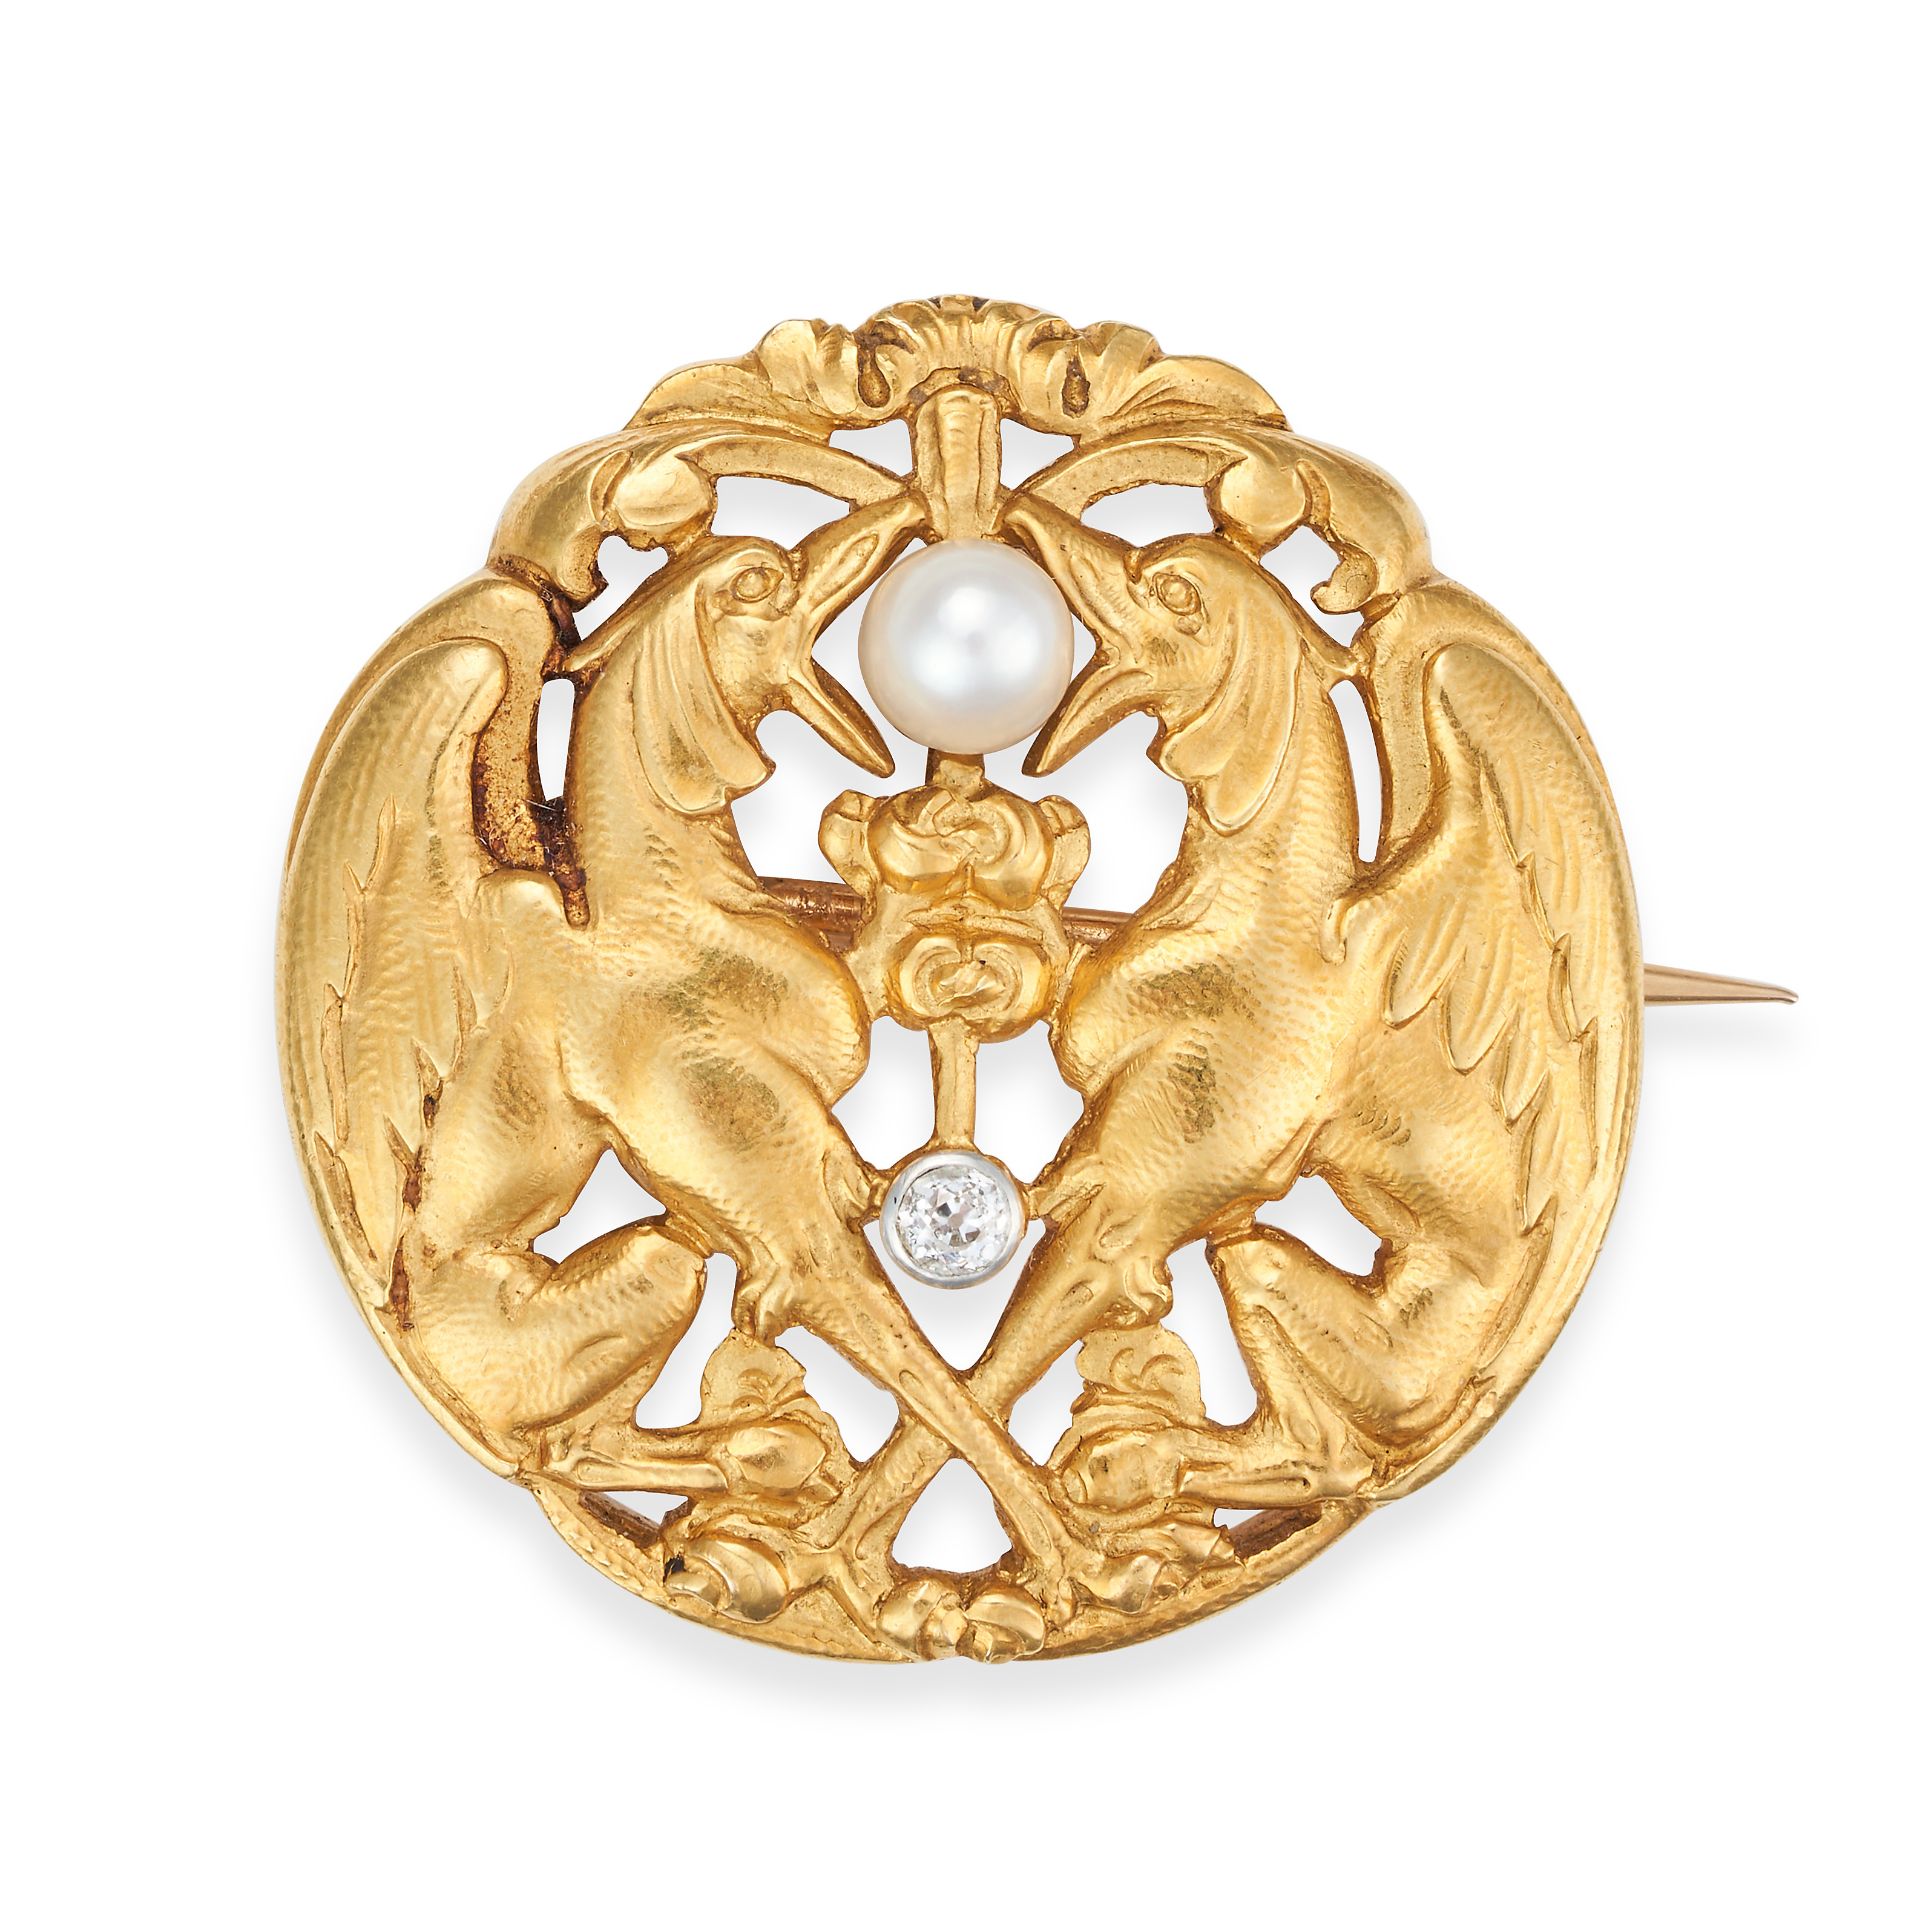 A FRENCH ART NOUVEAU DIAMOND AND PEARL GRIFFIN BROOCH in 18ct yellow gold, the circular openwork ...